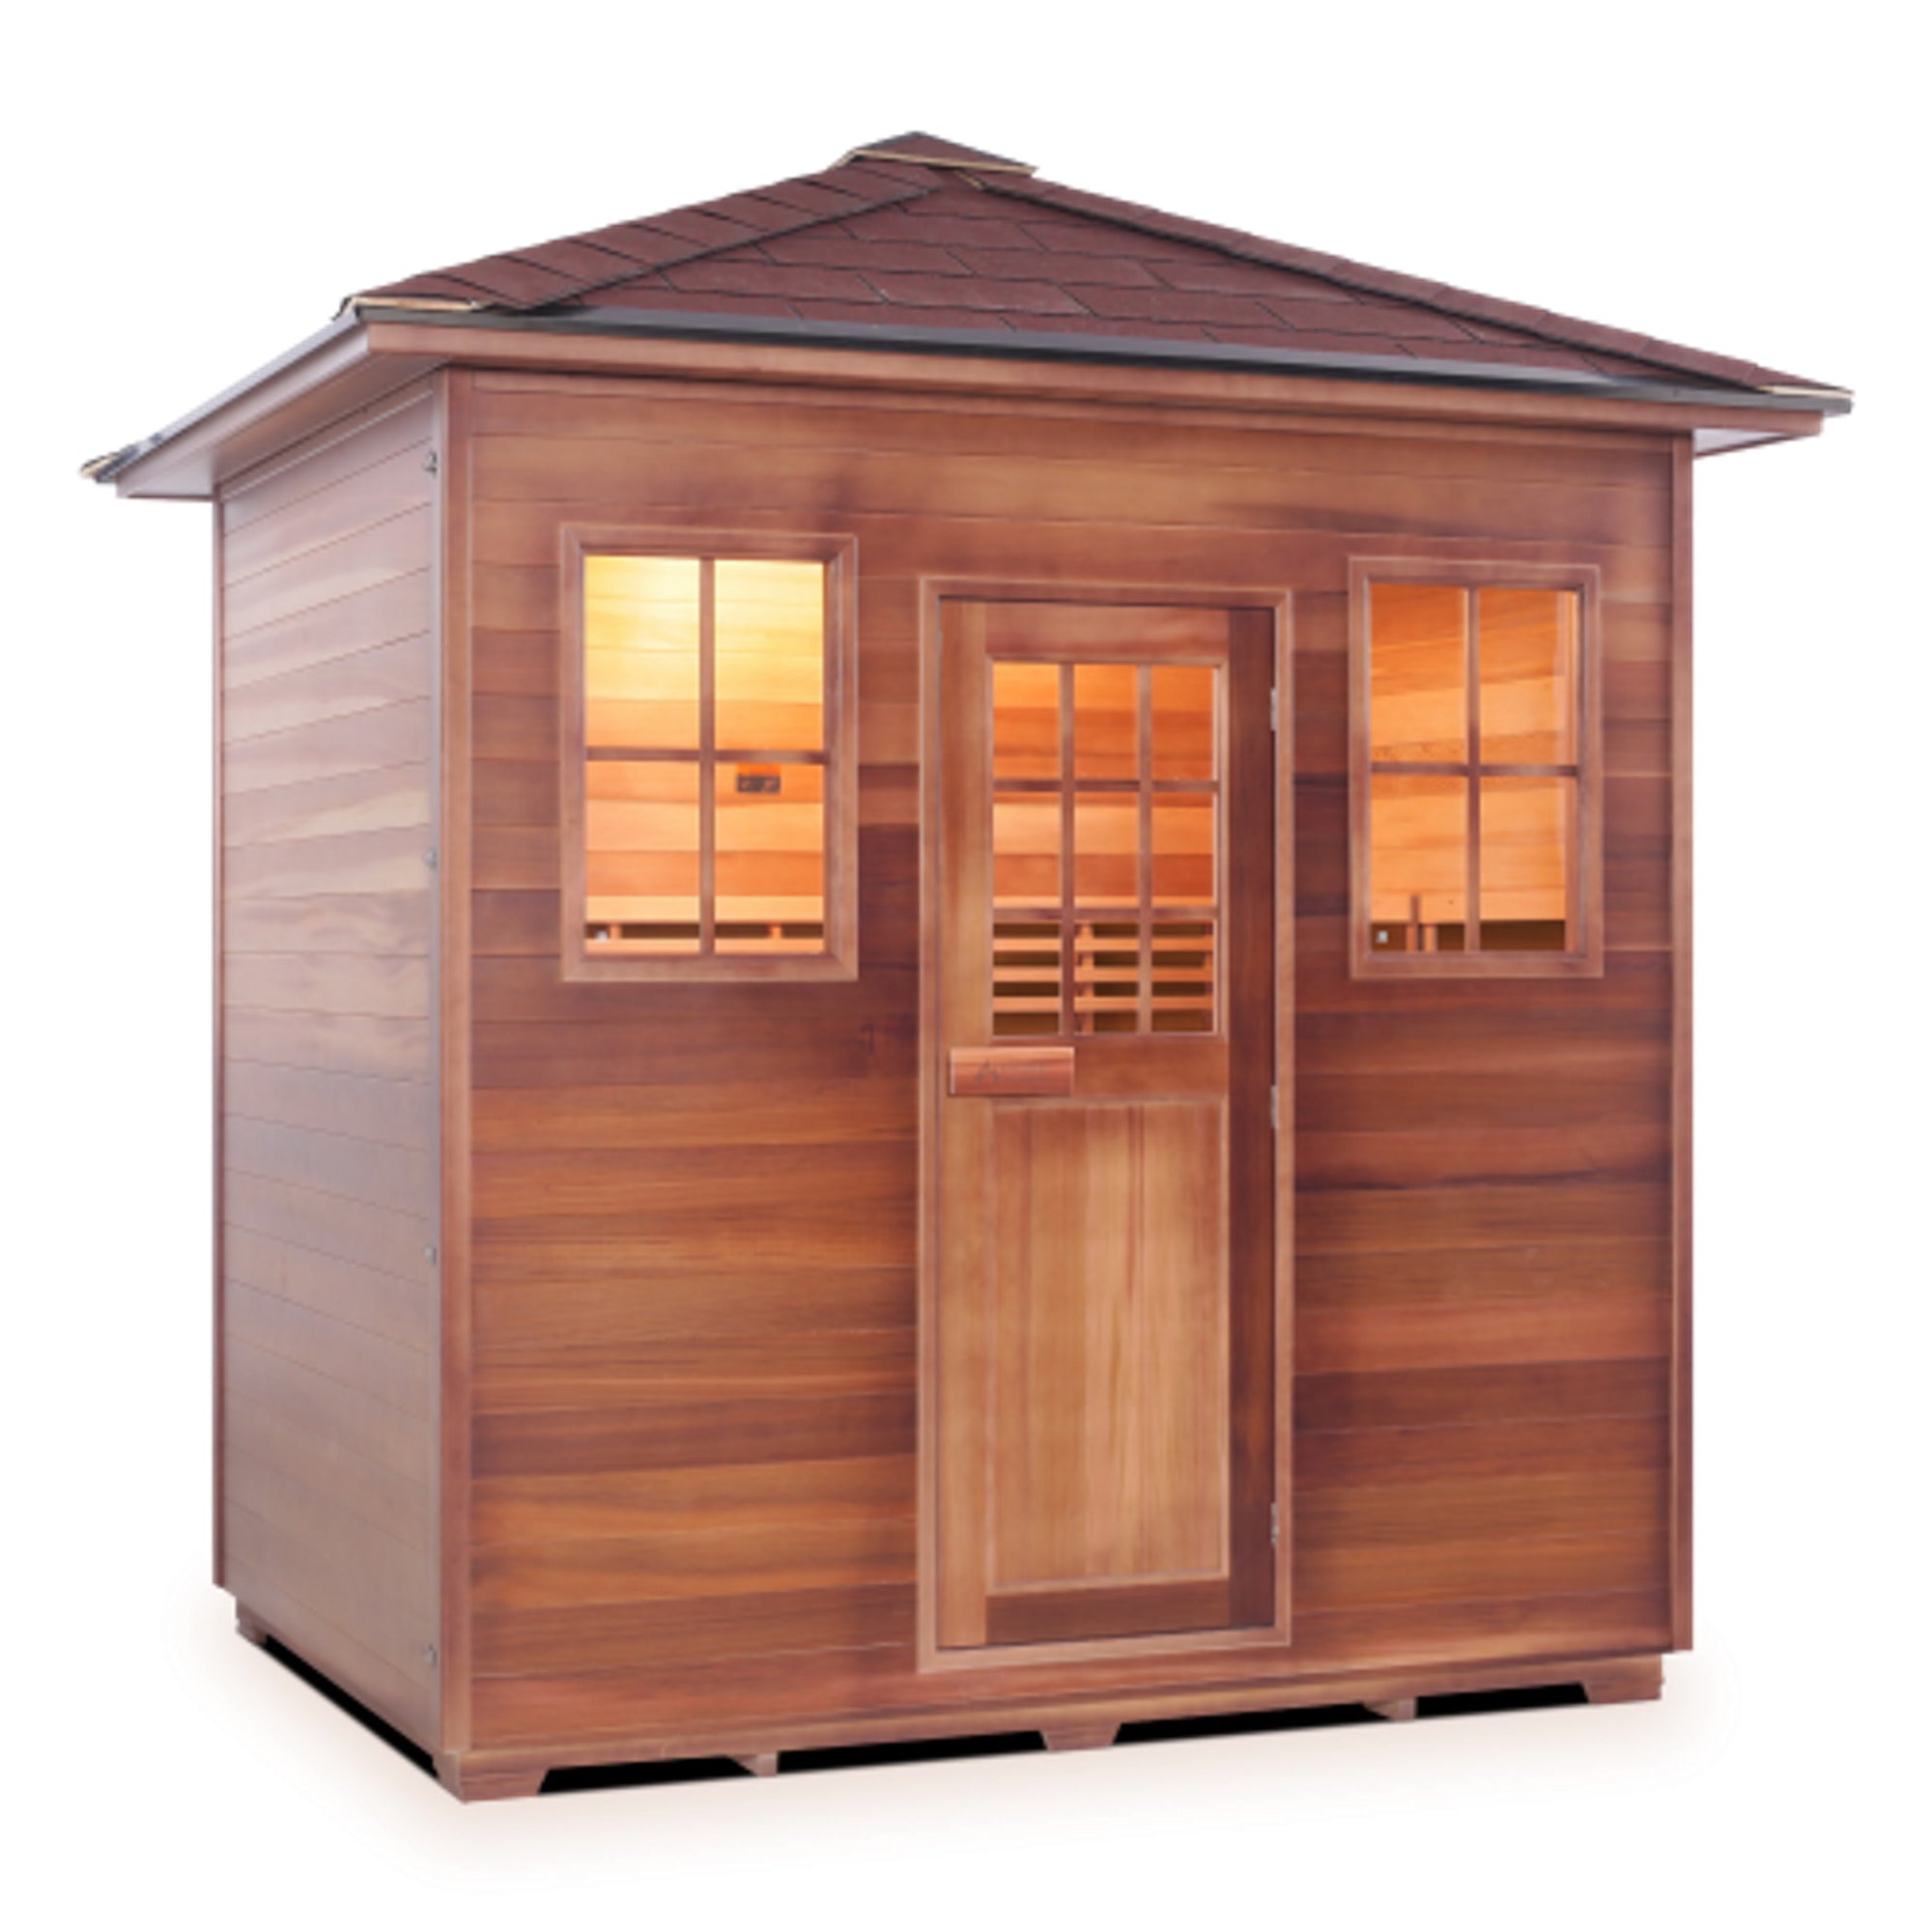 Enlighten sauna SaunaTerra Dry Traditional MoonLight 5 Person Outdoor Sauna Canadian Red Cedar Wood Outside And Inside Double Roof ( Flat Roof + peak roof) front view